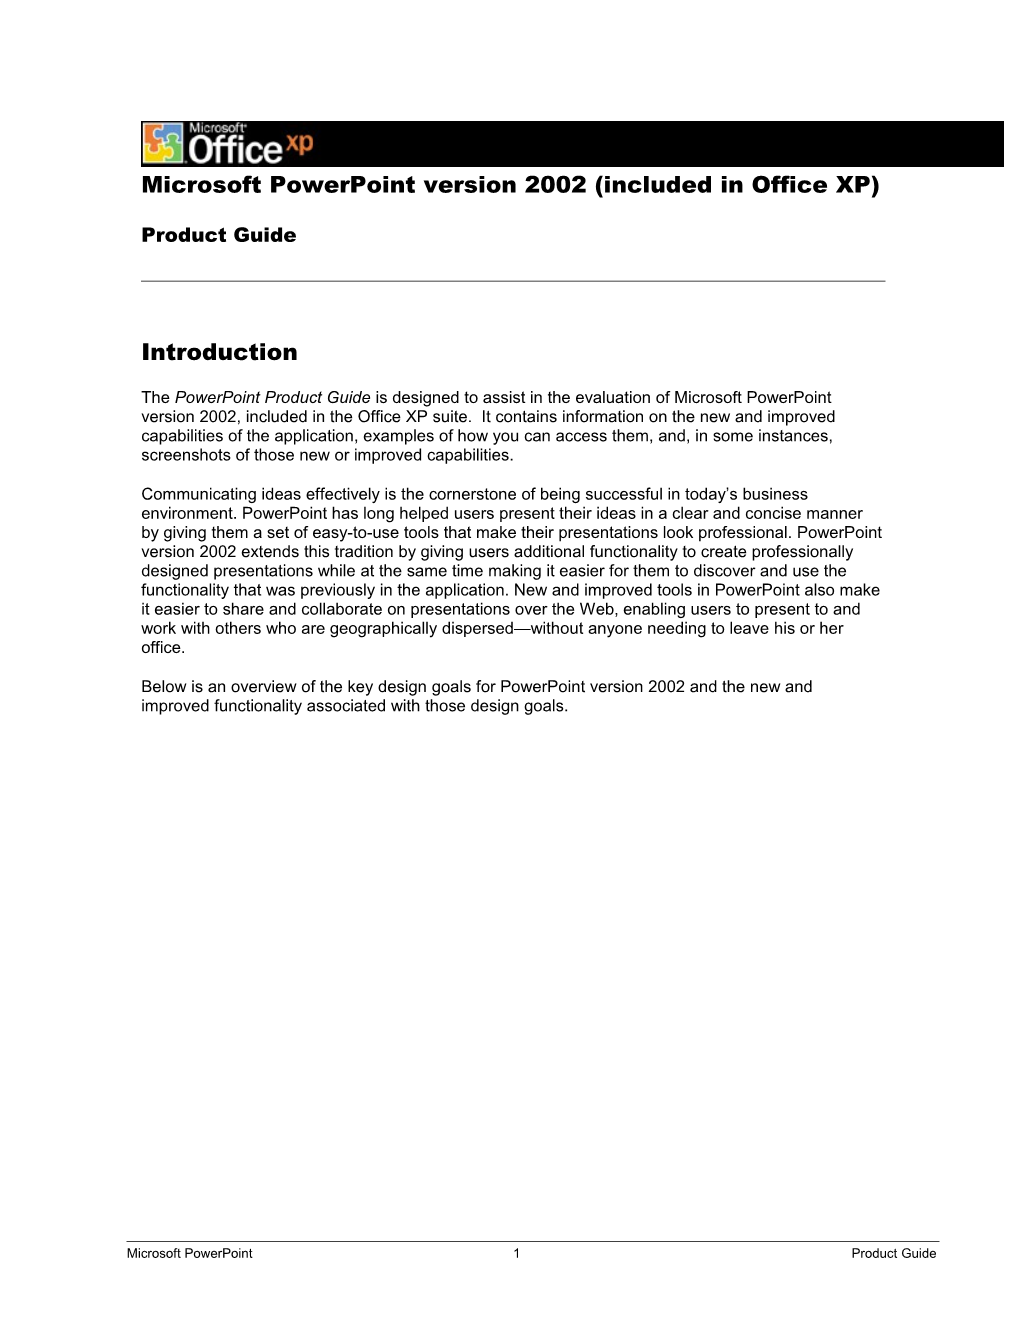 Microsoft Powerpoint Version 2002 (Included in Office XP)